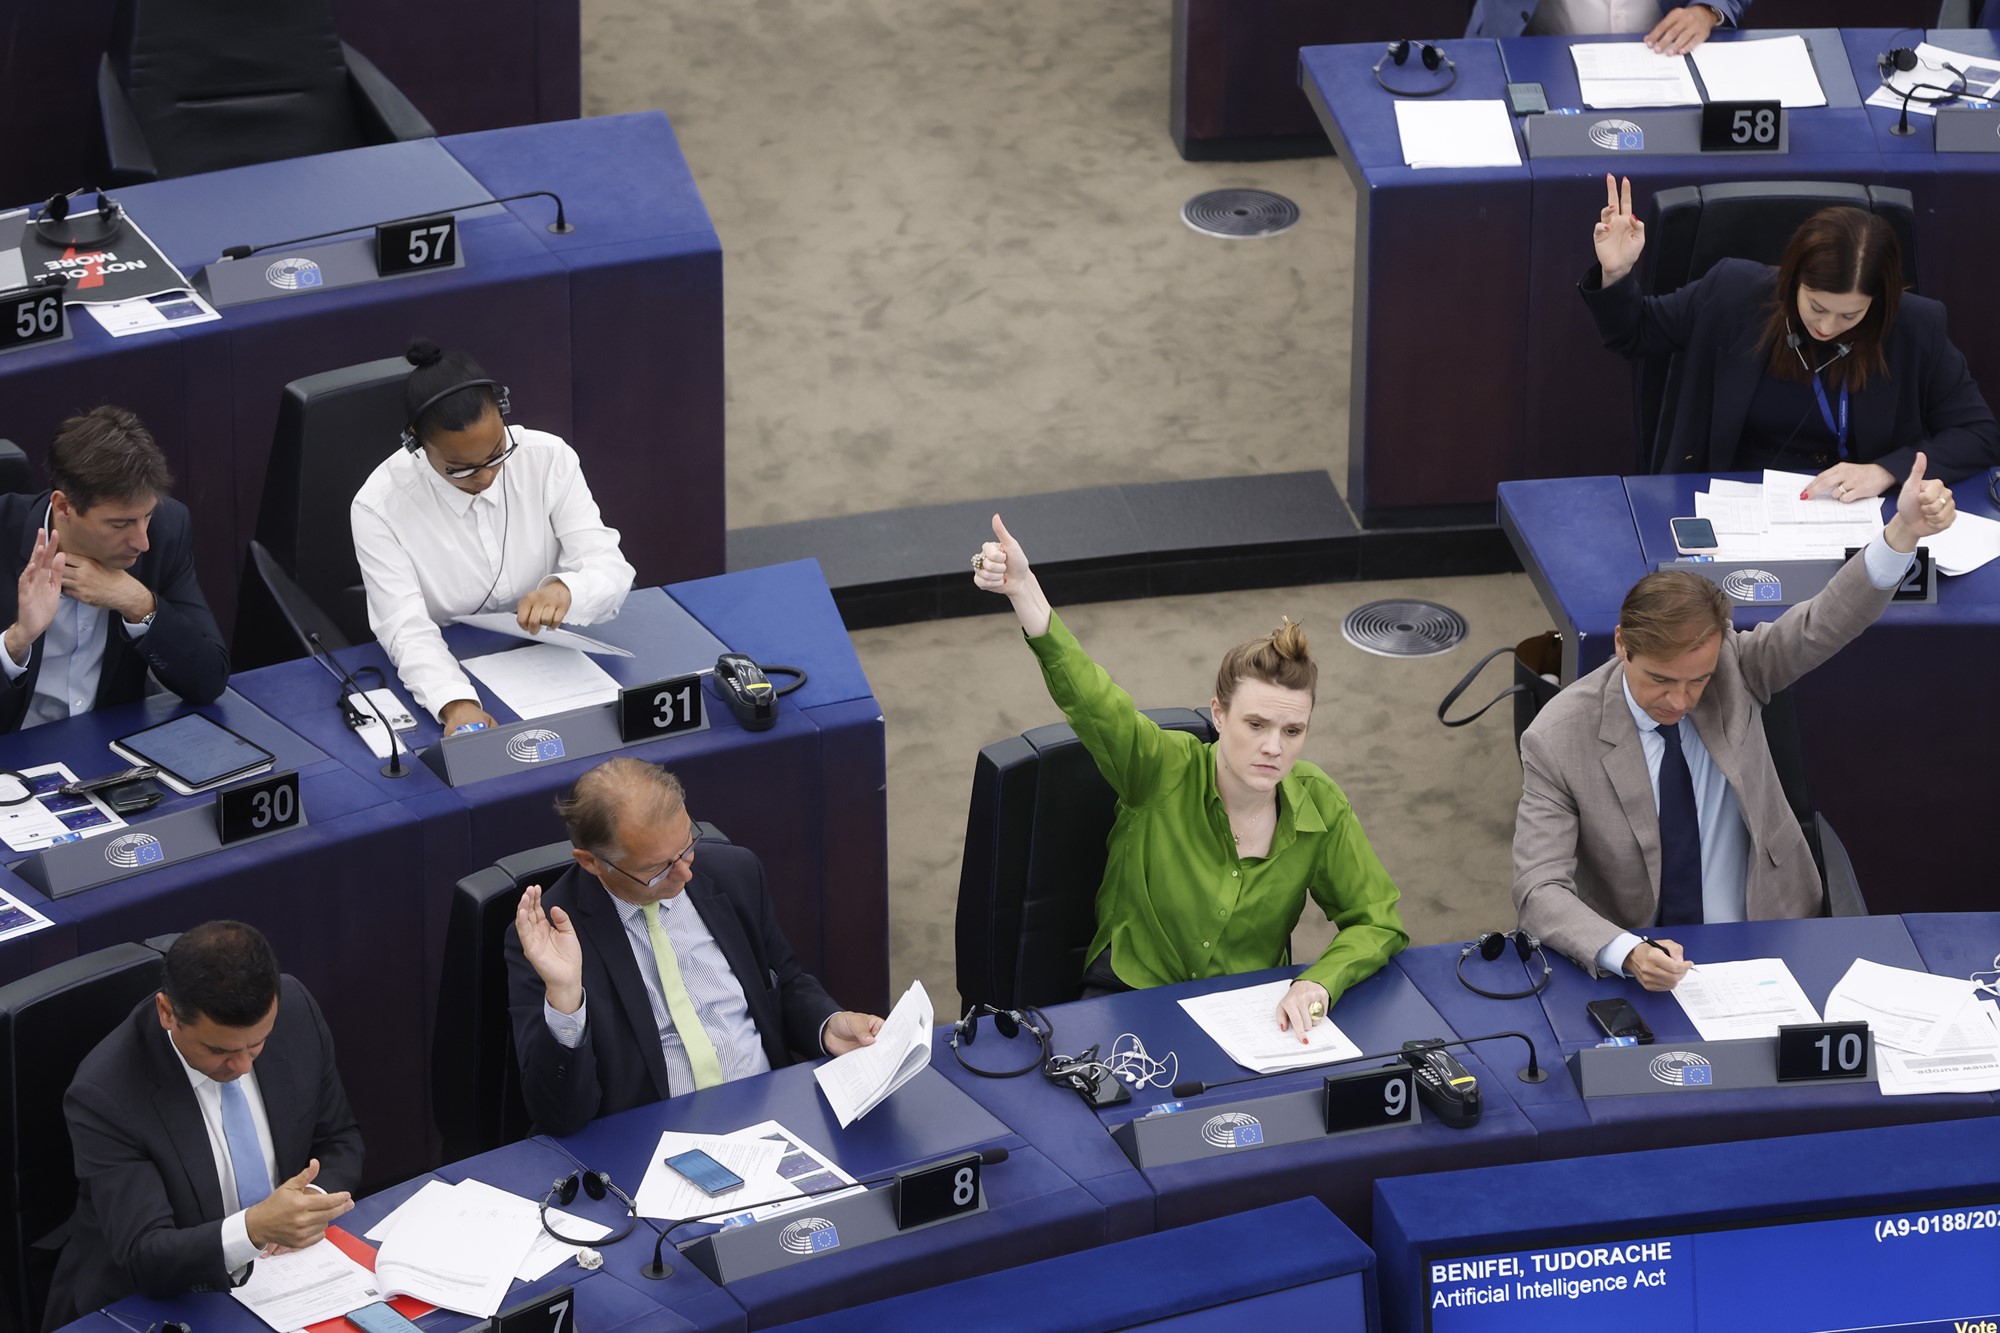 Some officials raise their hands to vote during a meeting at the European Parliament in Strasbourg, eastern France